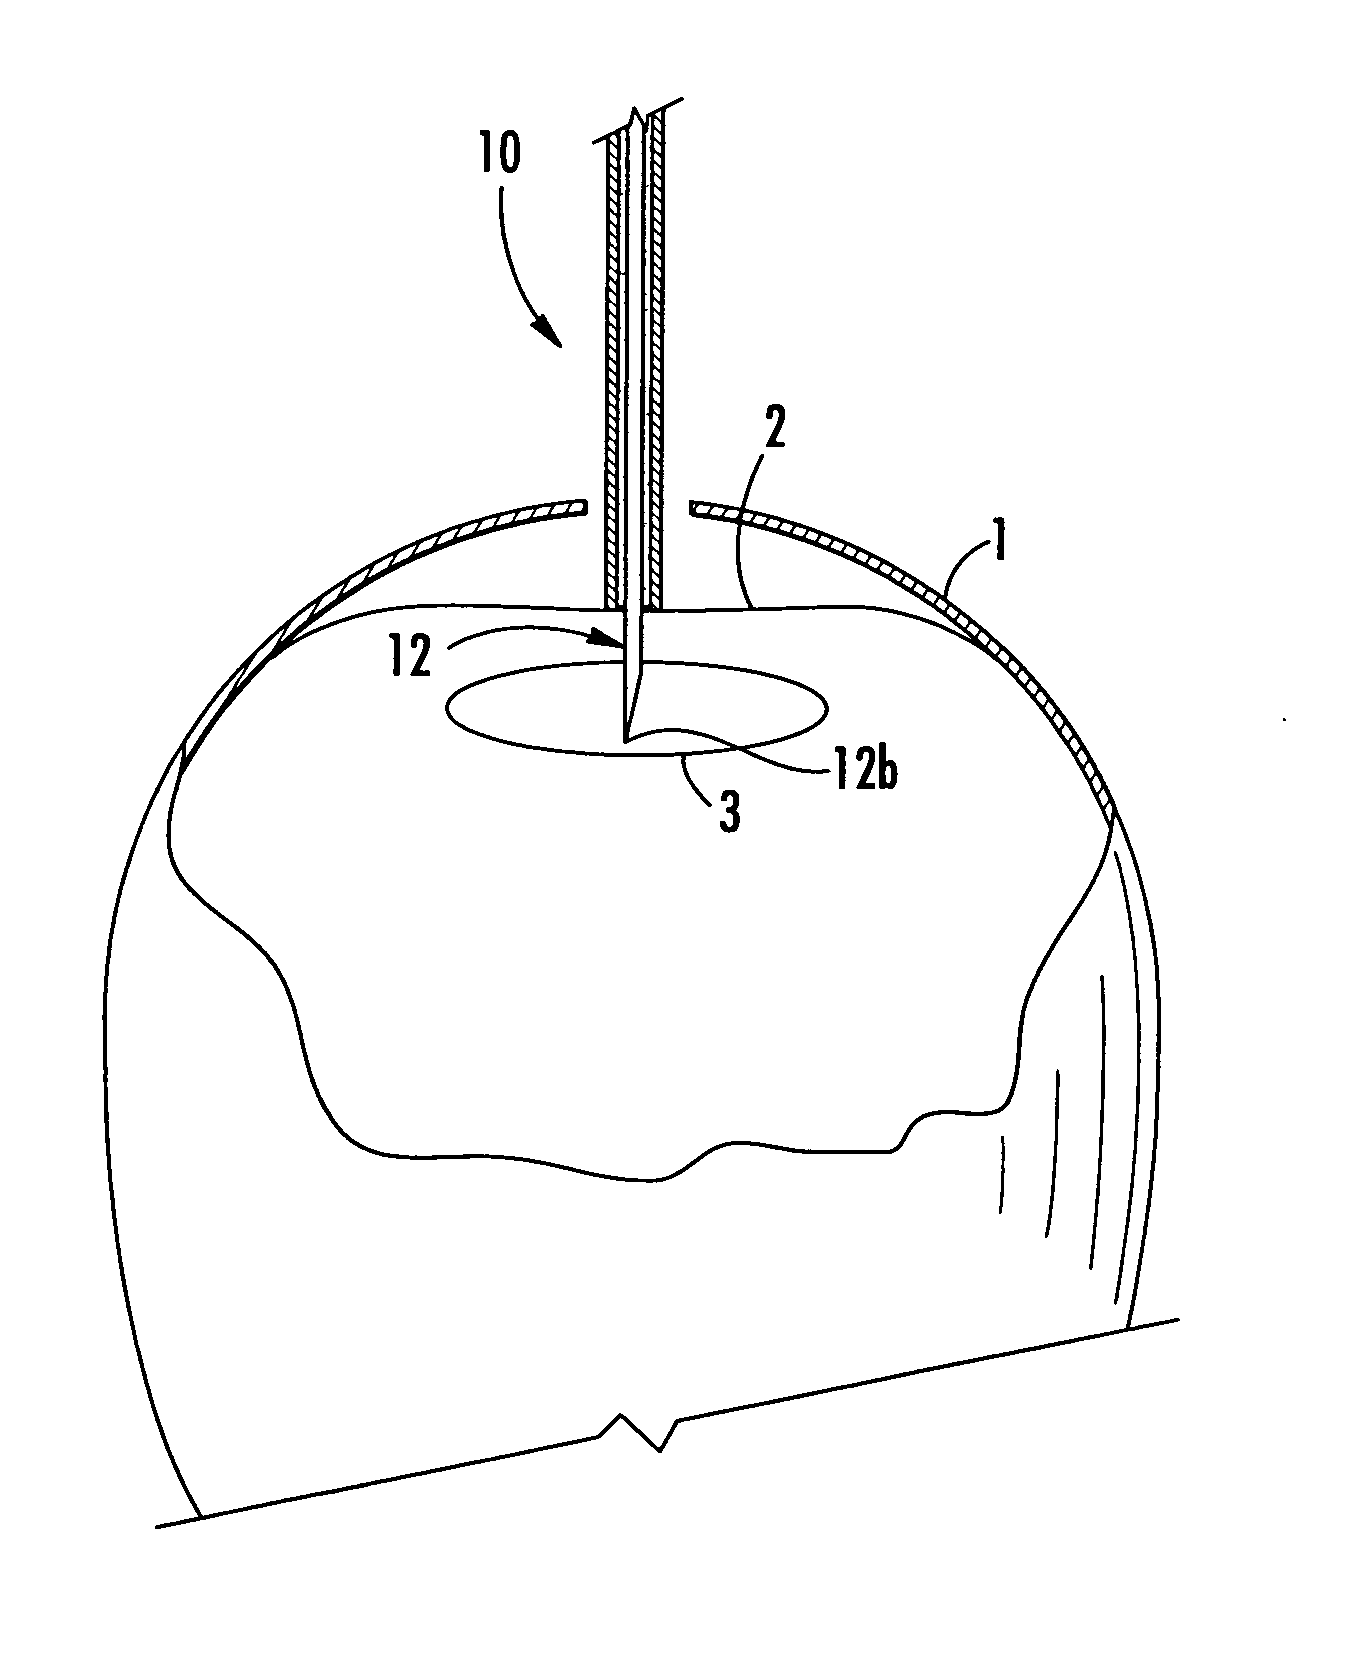 Methods and apparatus for injecting and sampling material through avian egg membranes